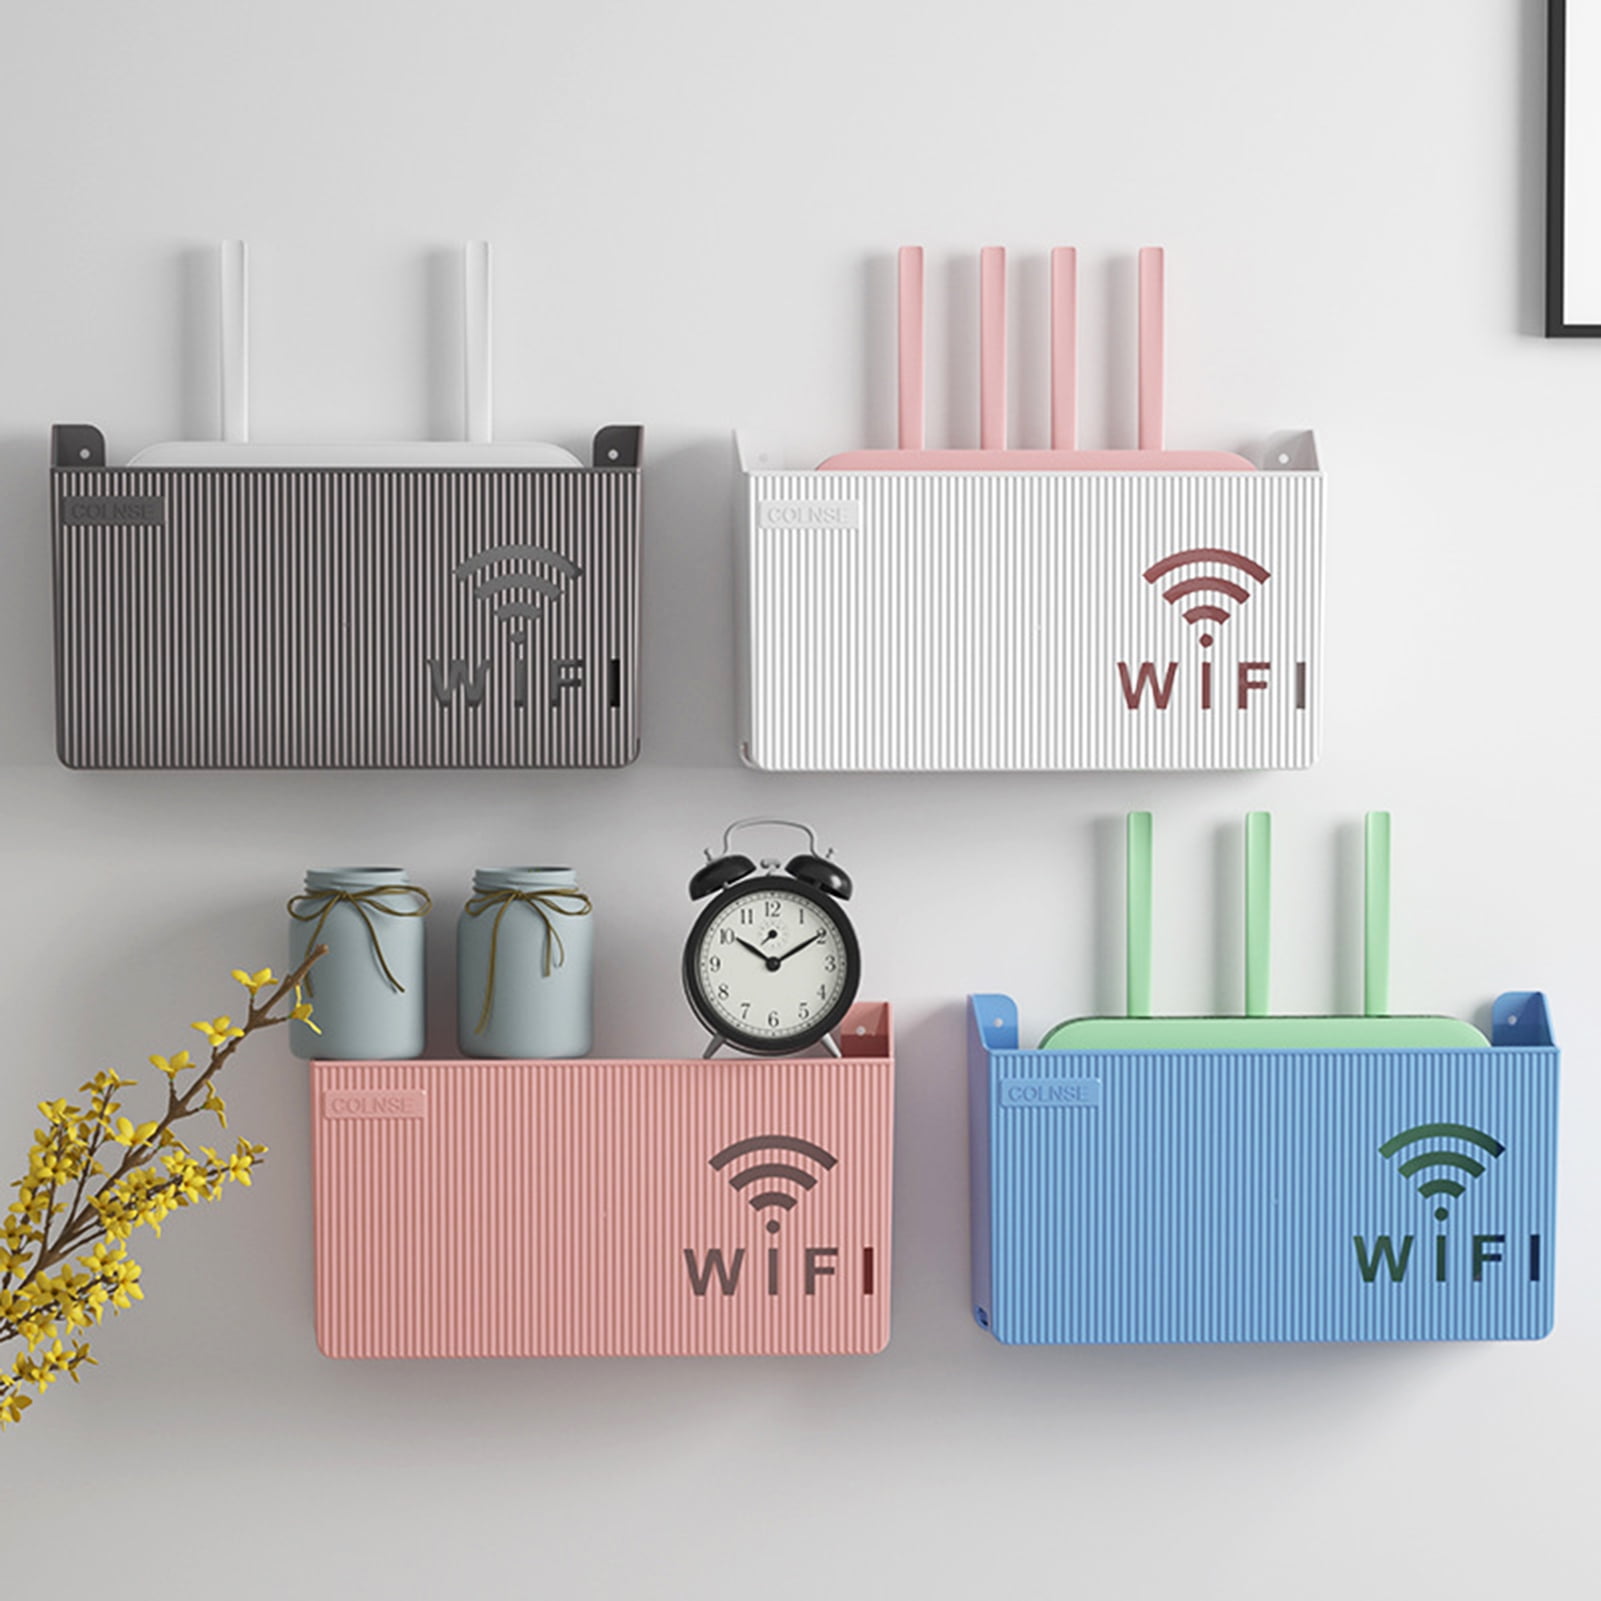 Details about   Wireless Wifi Router Storage Box Shelf Wall Hanging Bracket Cable Organizer Easy 